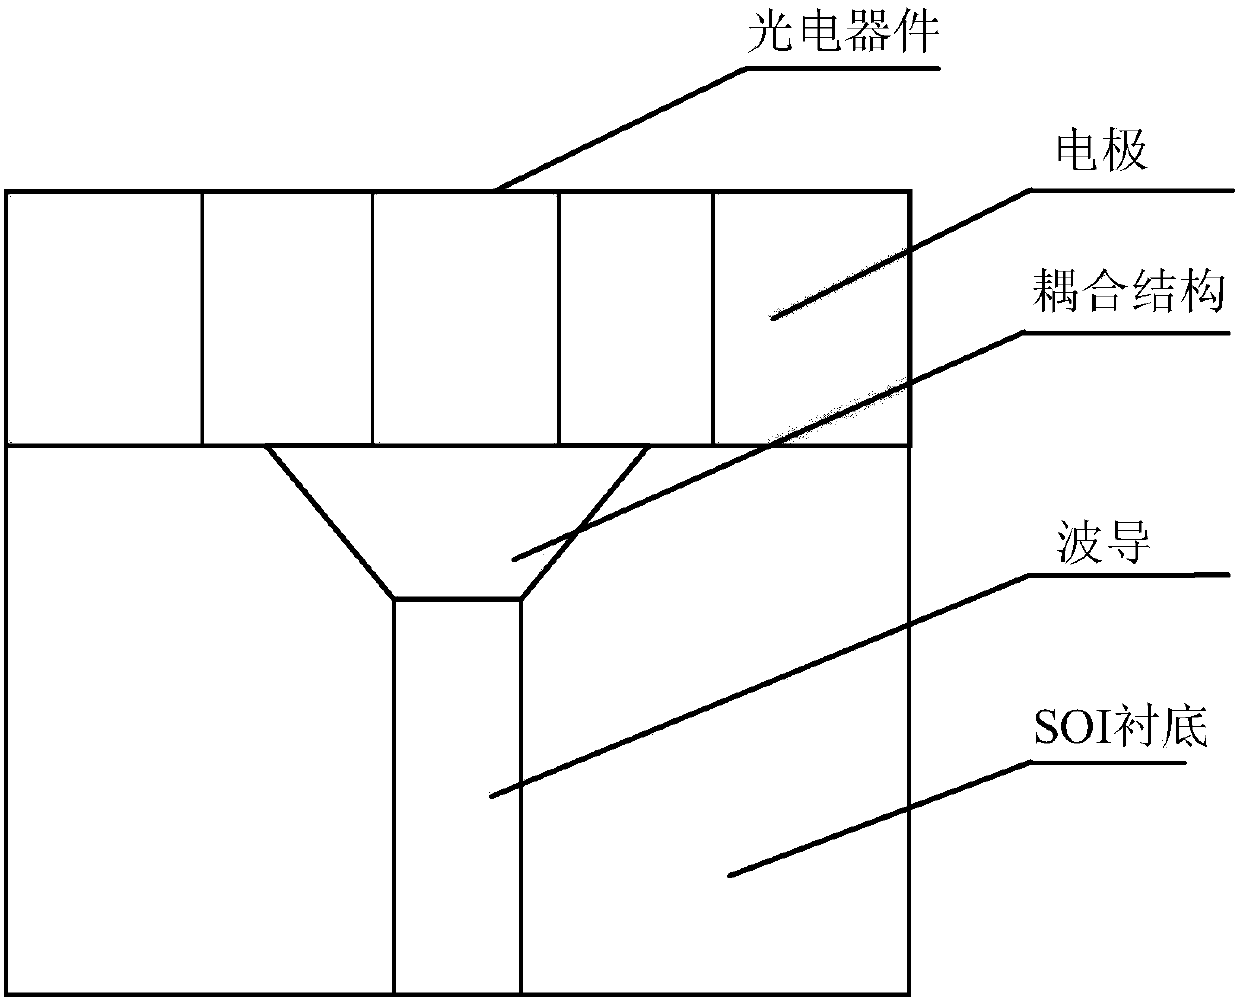 N-Ge-i-Ge-p-Si structural waveguide-type photoelectric detector based on LRC technology and manufacturing method